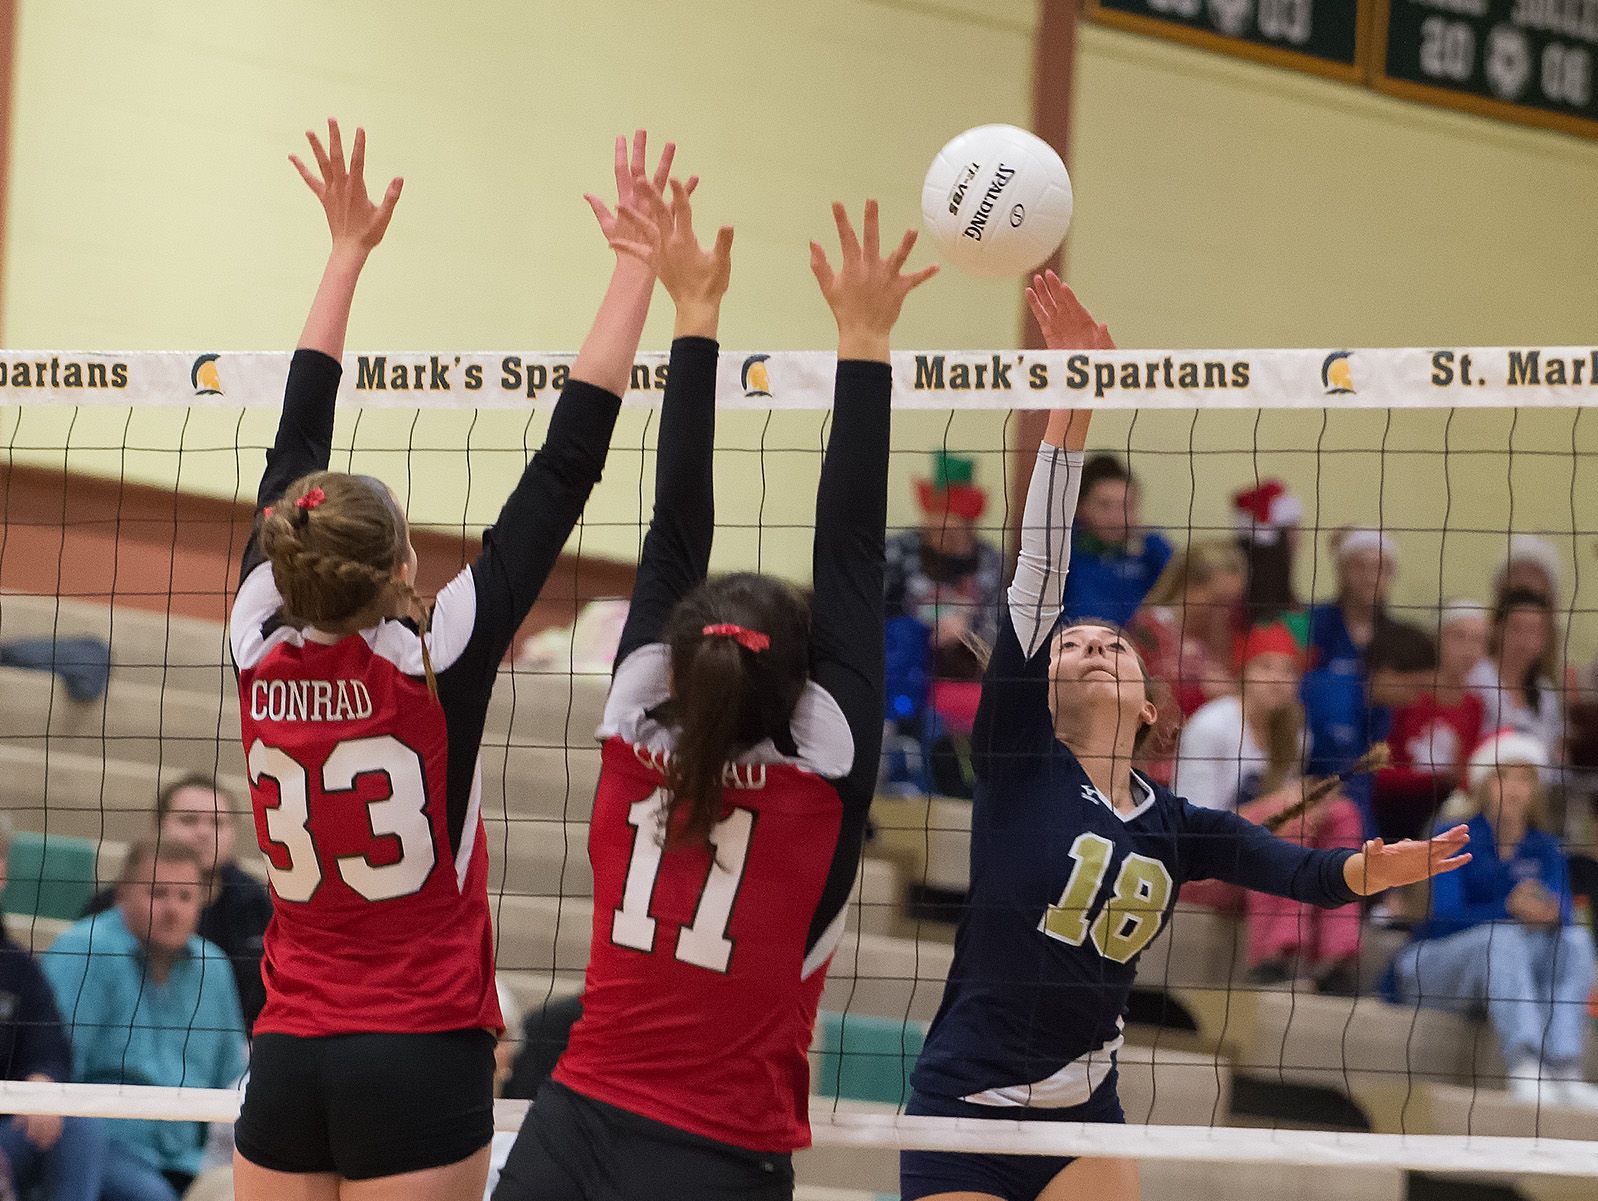 Delaware Military Academy's Nina Tindall (18) with a spike over the hands of Conrad's Julie Kulesza (33) and Madison Greer (11) in the second round game of the DIAA State Volleyball Tournament.